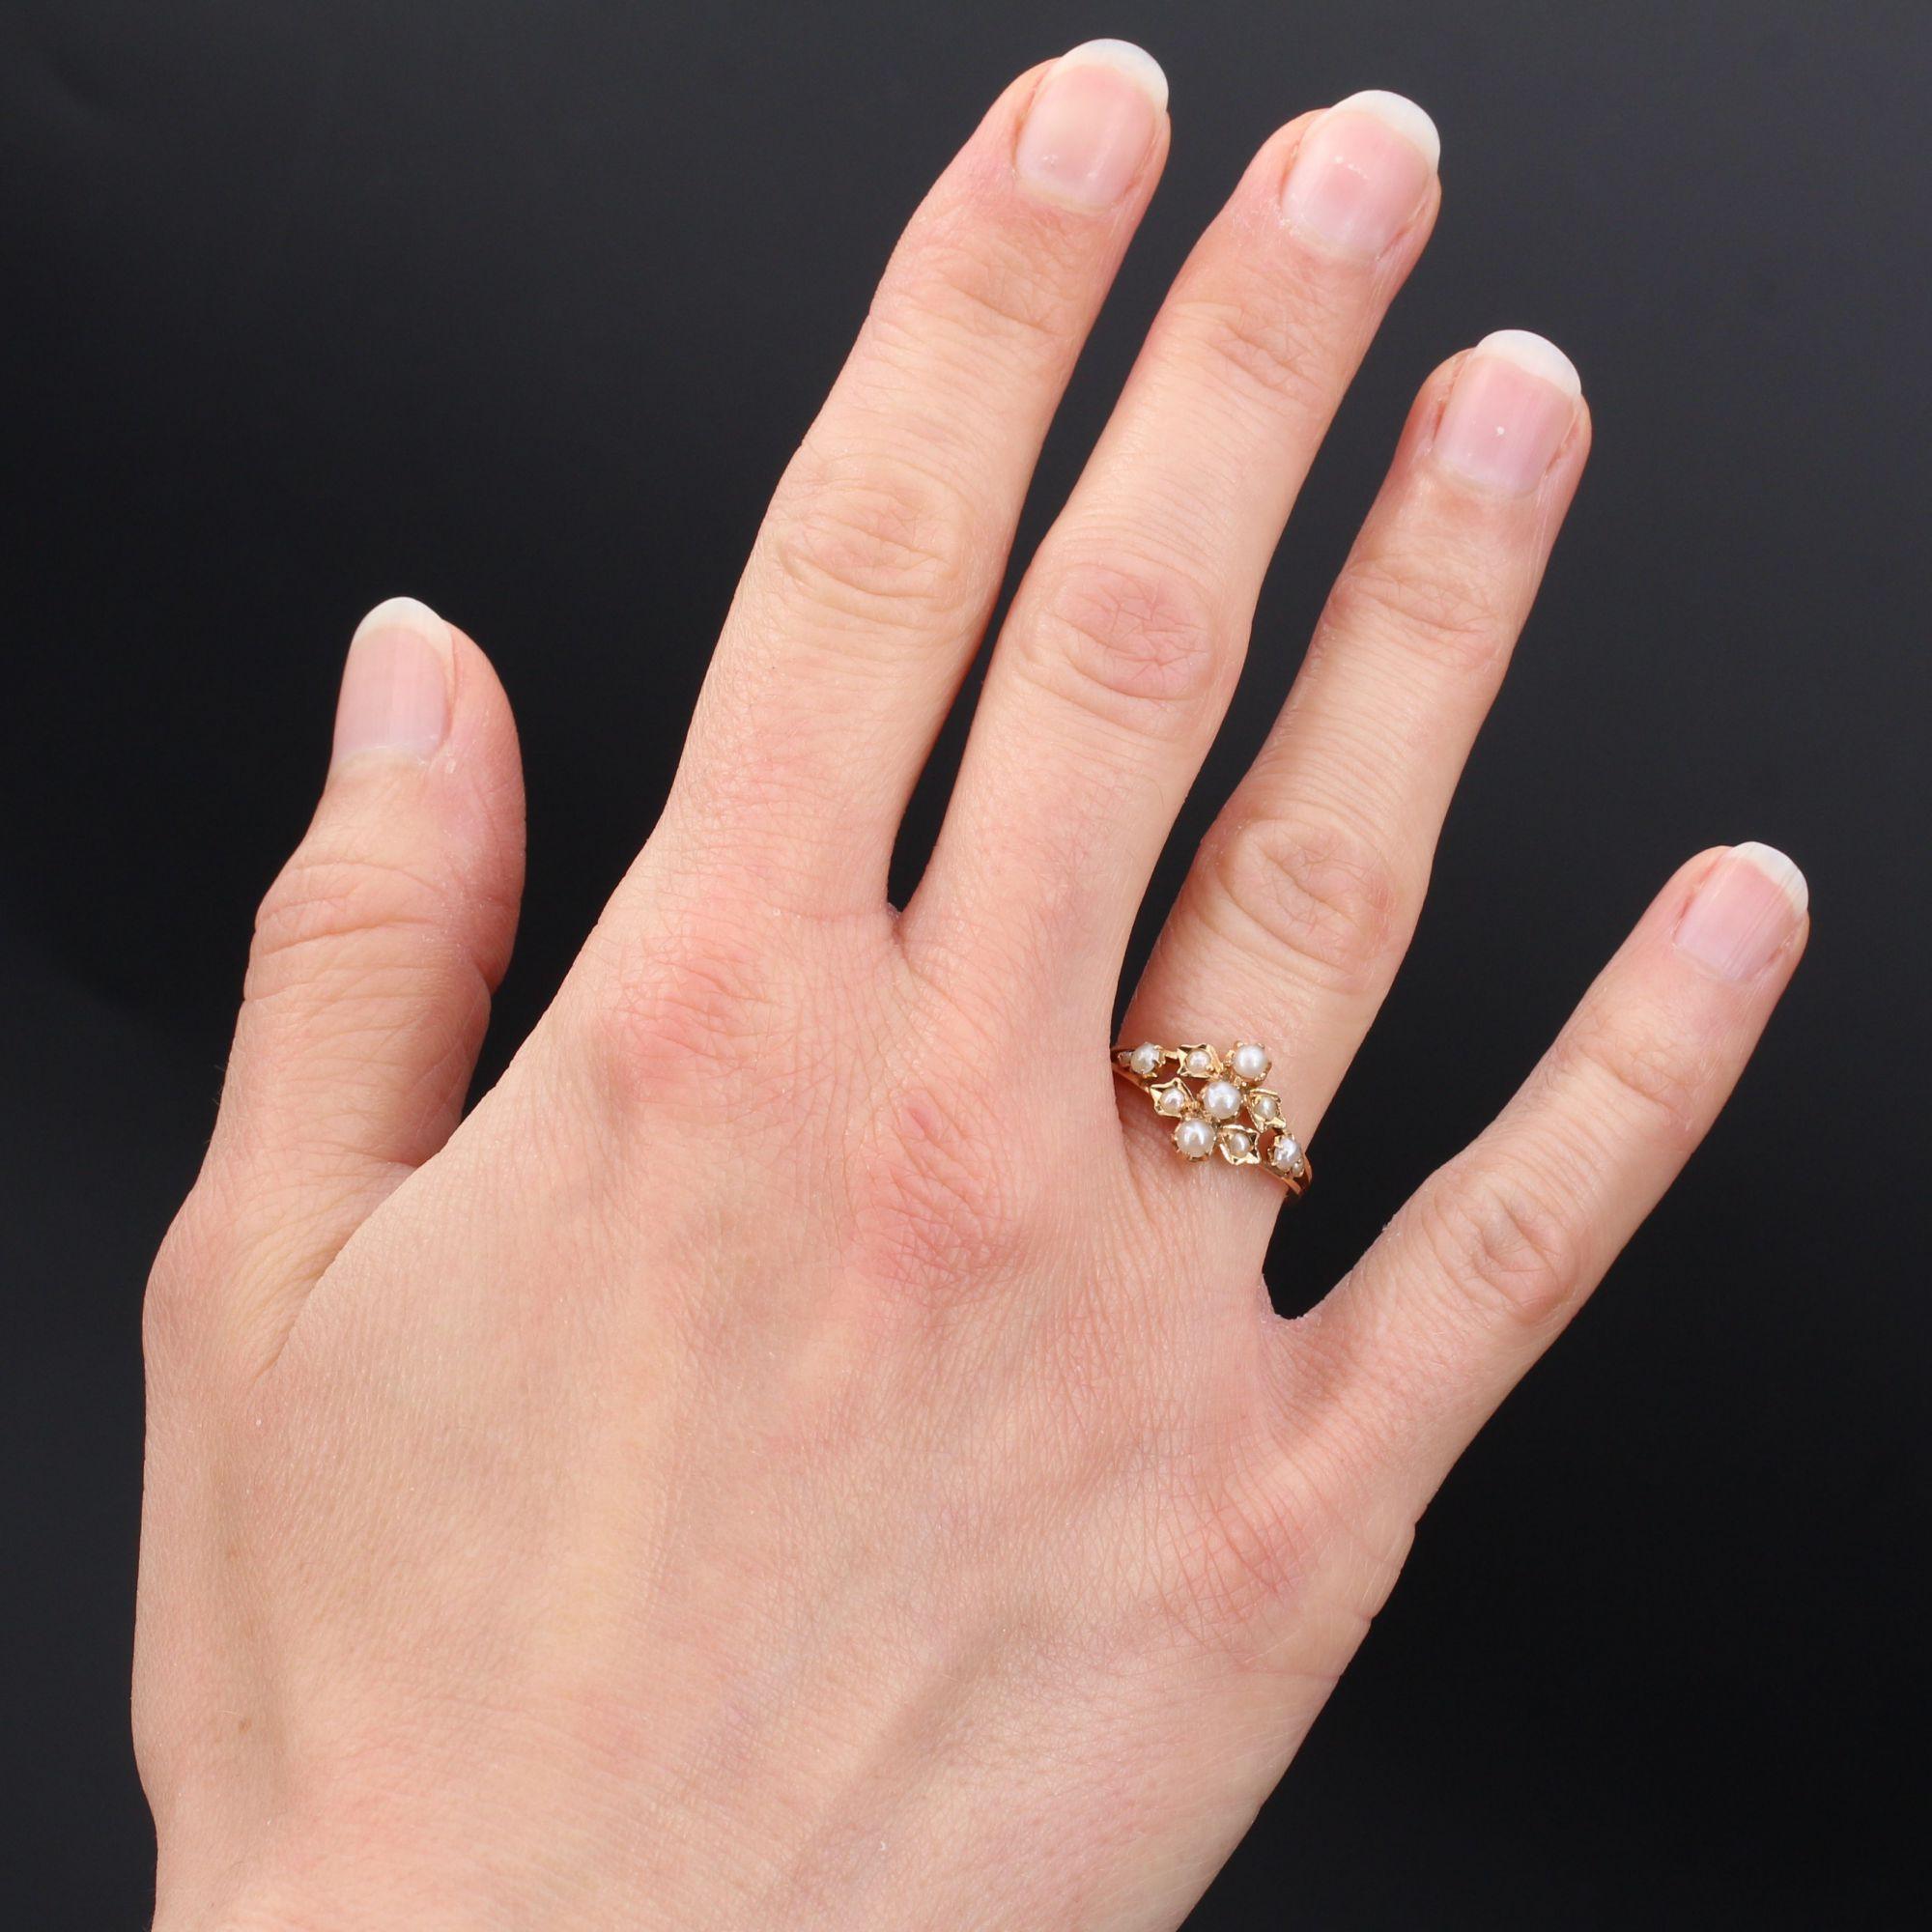 Ring in 18 karat rose gold.
Delightful antique ring, it is formed of two rings which join together at the base and which, on the top, support a line of three half pearls set with claws, shouldered on both sides of 2 x 4 half pearls closed set and